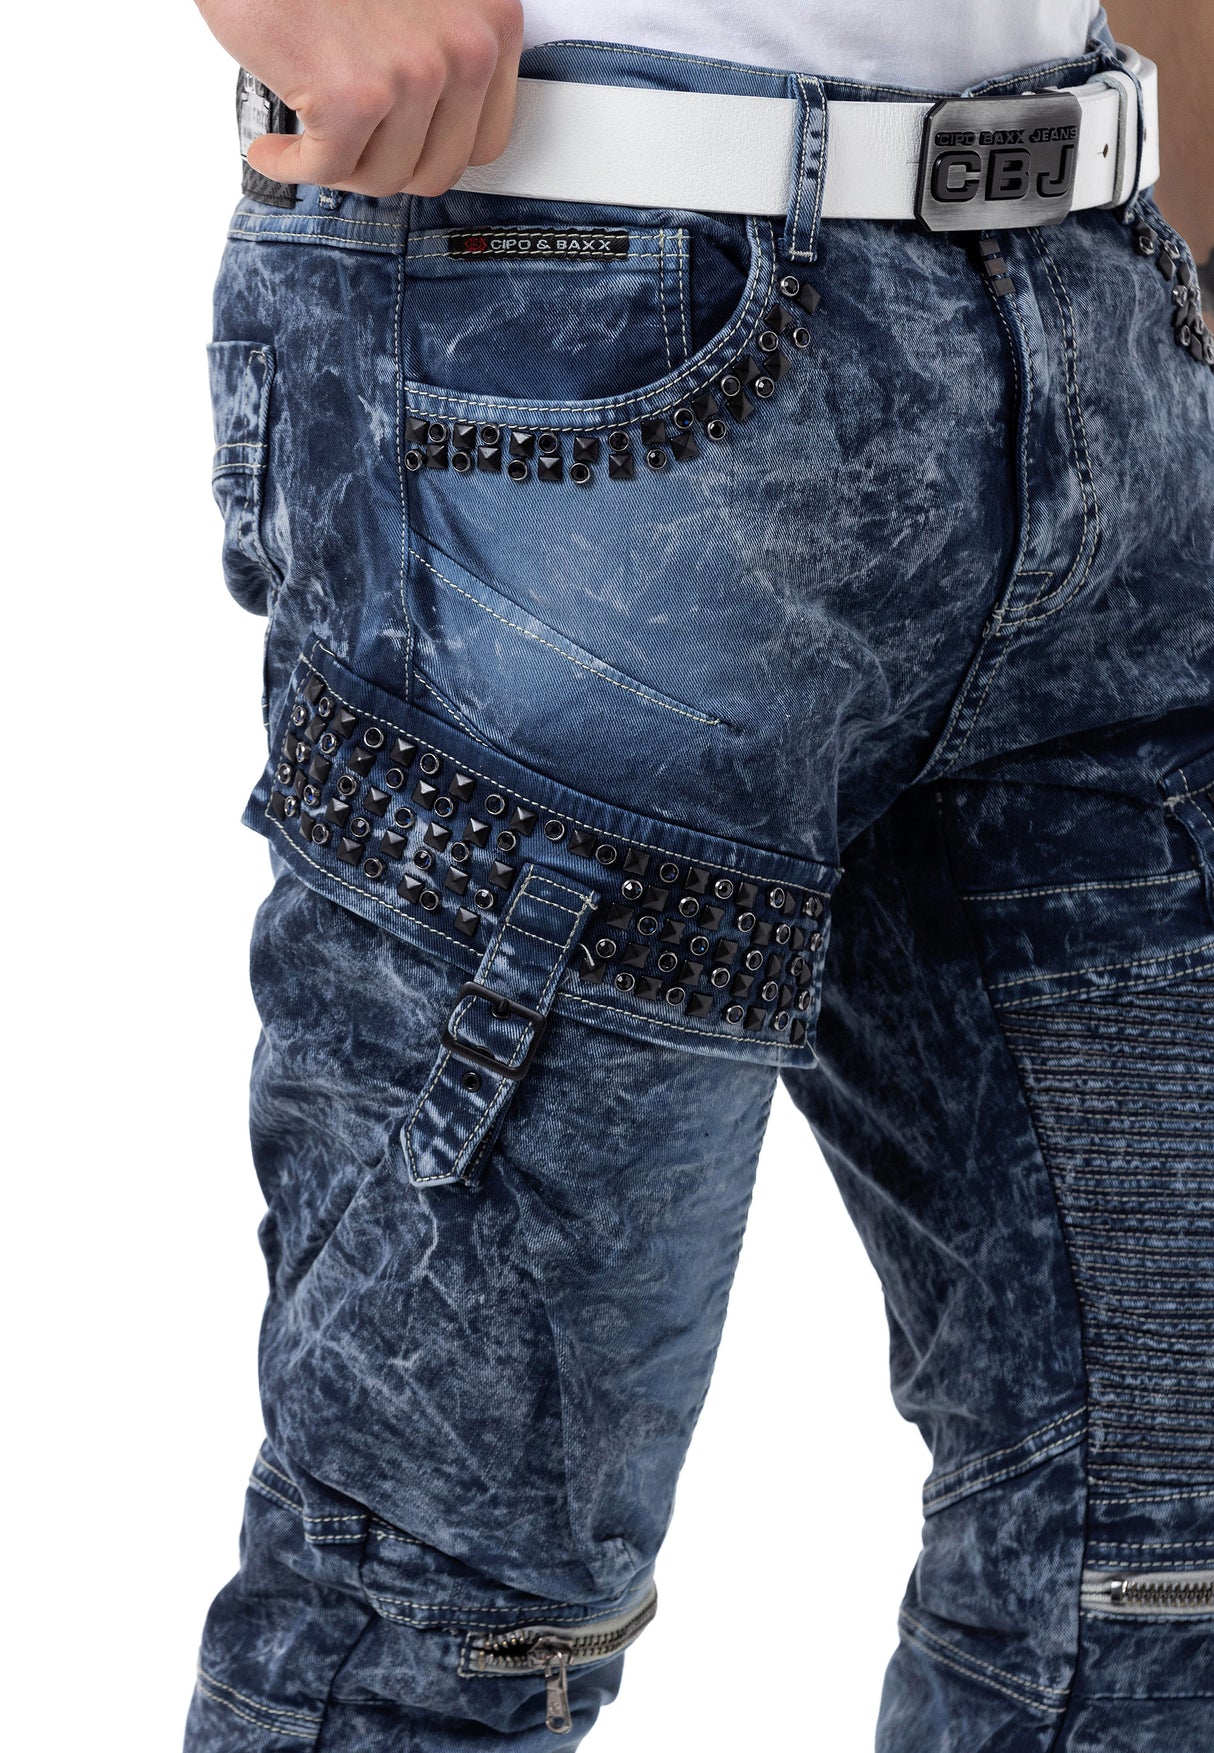 CD494 men's comfortable jeans with gemstone bags in regular fit